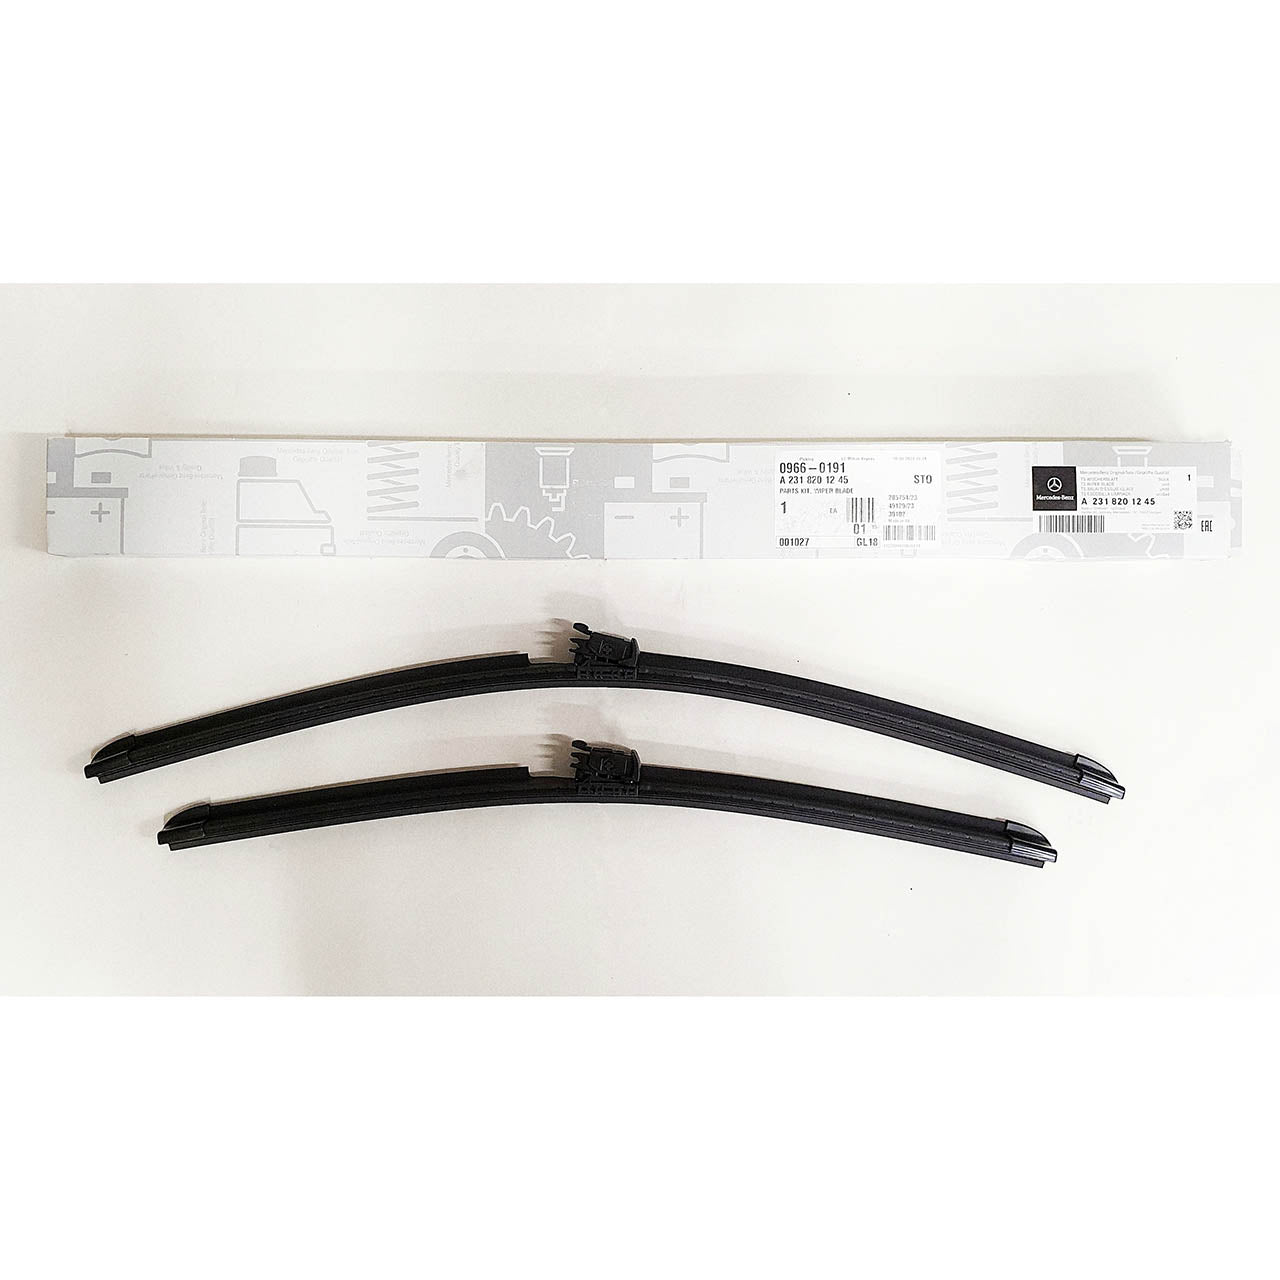 Genuine Mercedes-Benz SL Class Heated Front Wiper Blades for R231 models